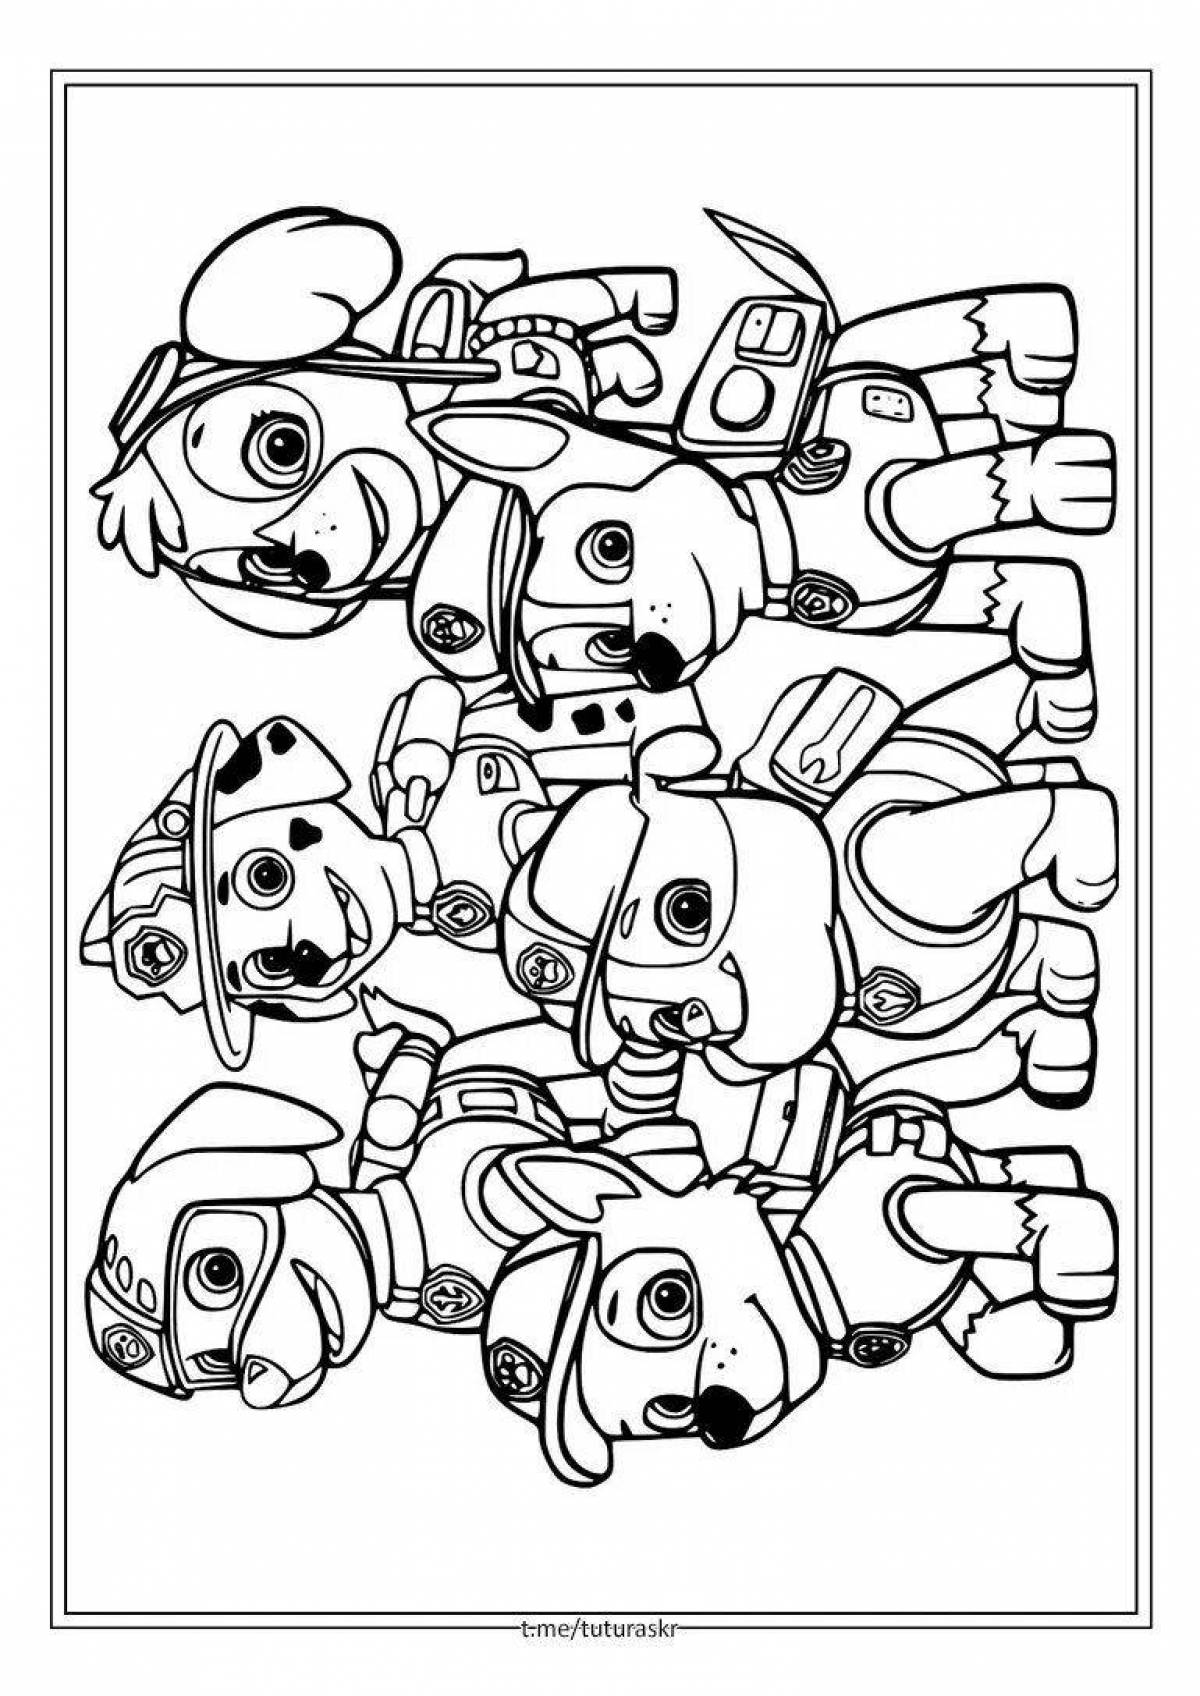 Cozy coloring page paw patrol all puppies